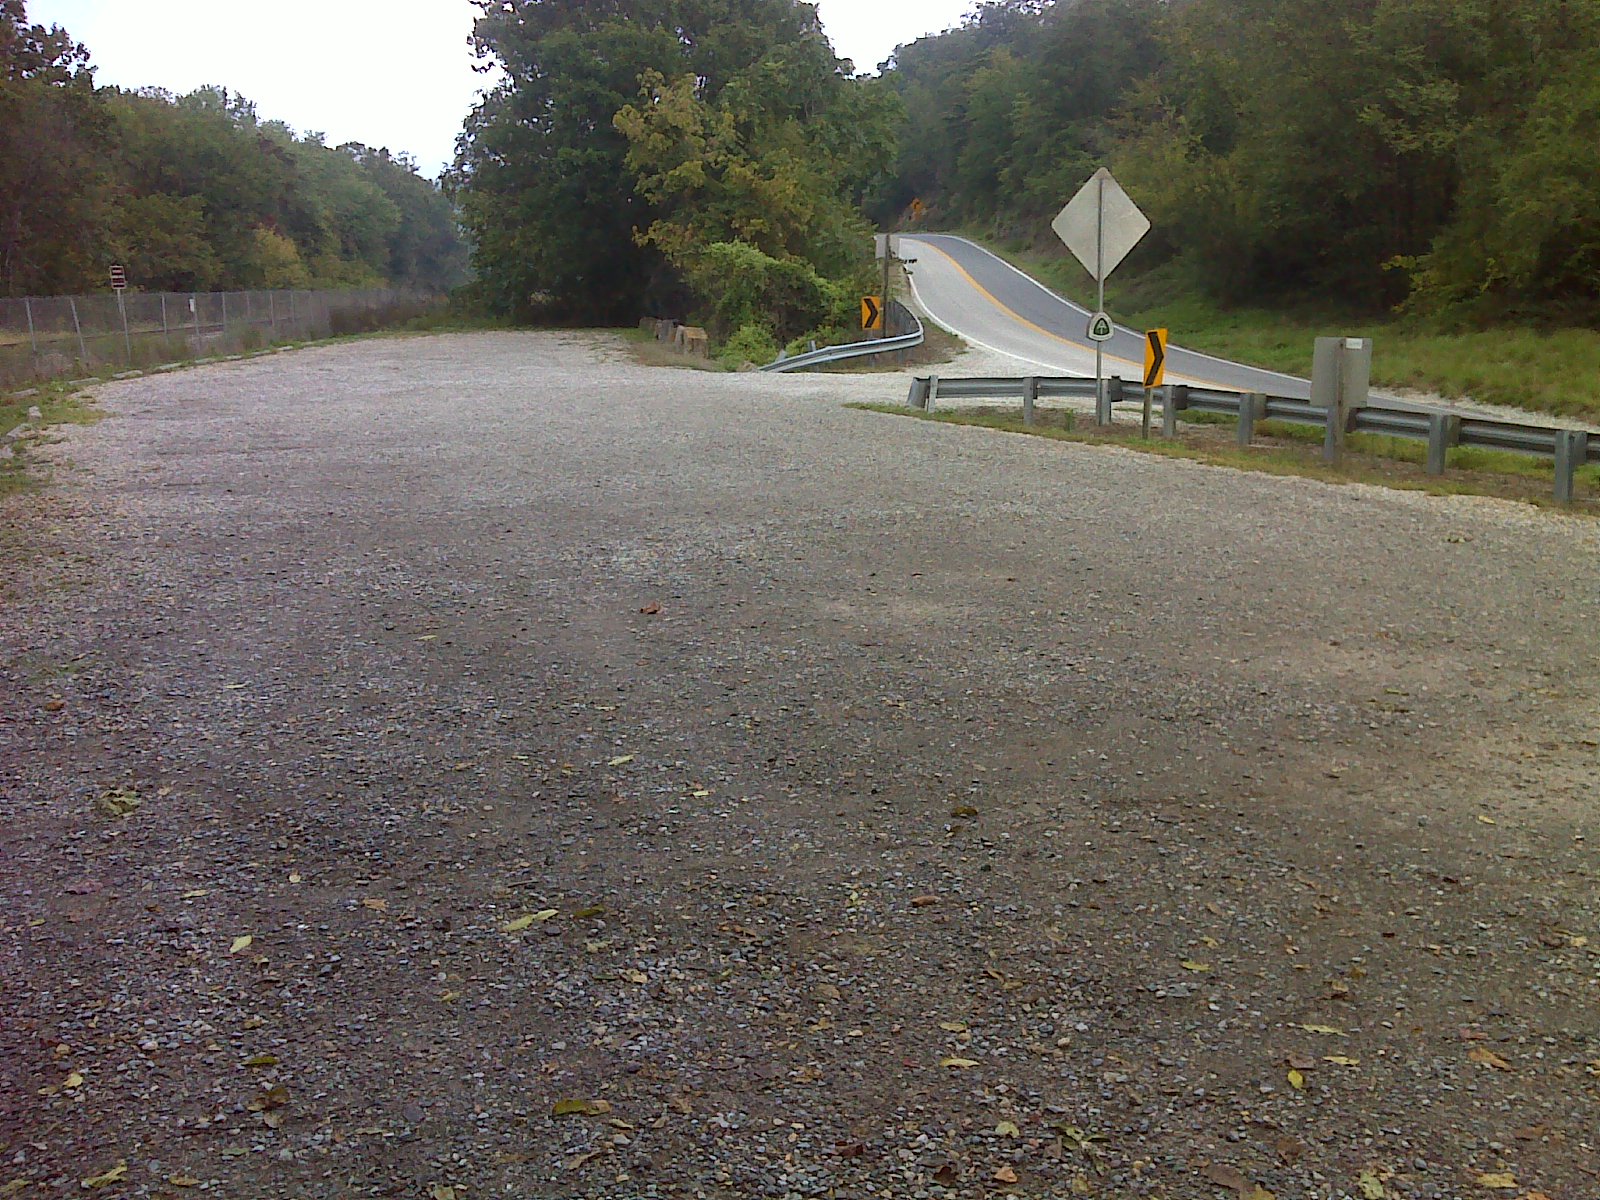 mm 0.0 Parking  area off US 501 near trail crossing of the James River. GPS N37.5967 W79.3911  Courtesy pjwetzel@gmail.com